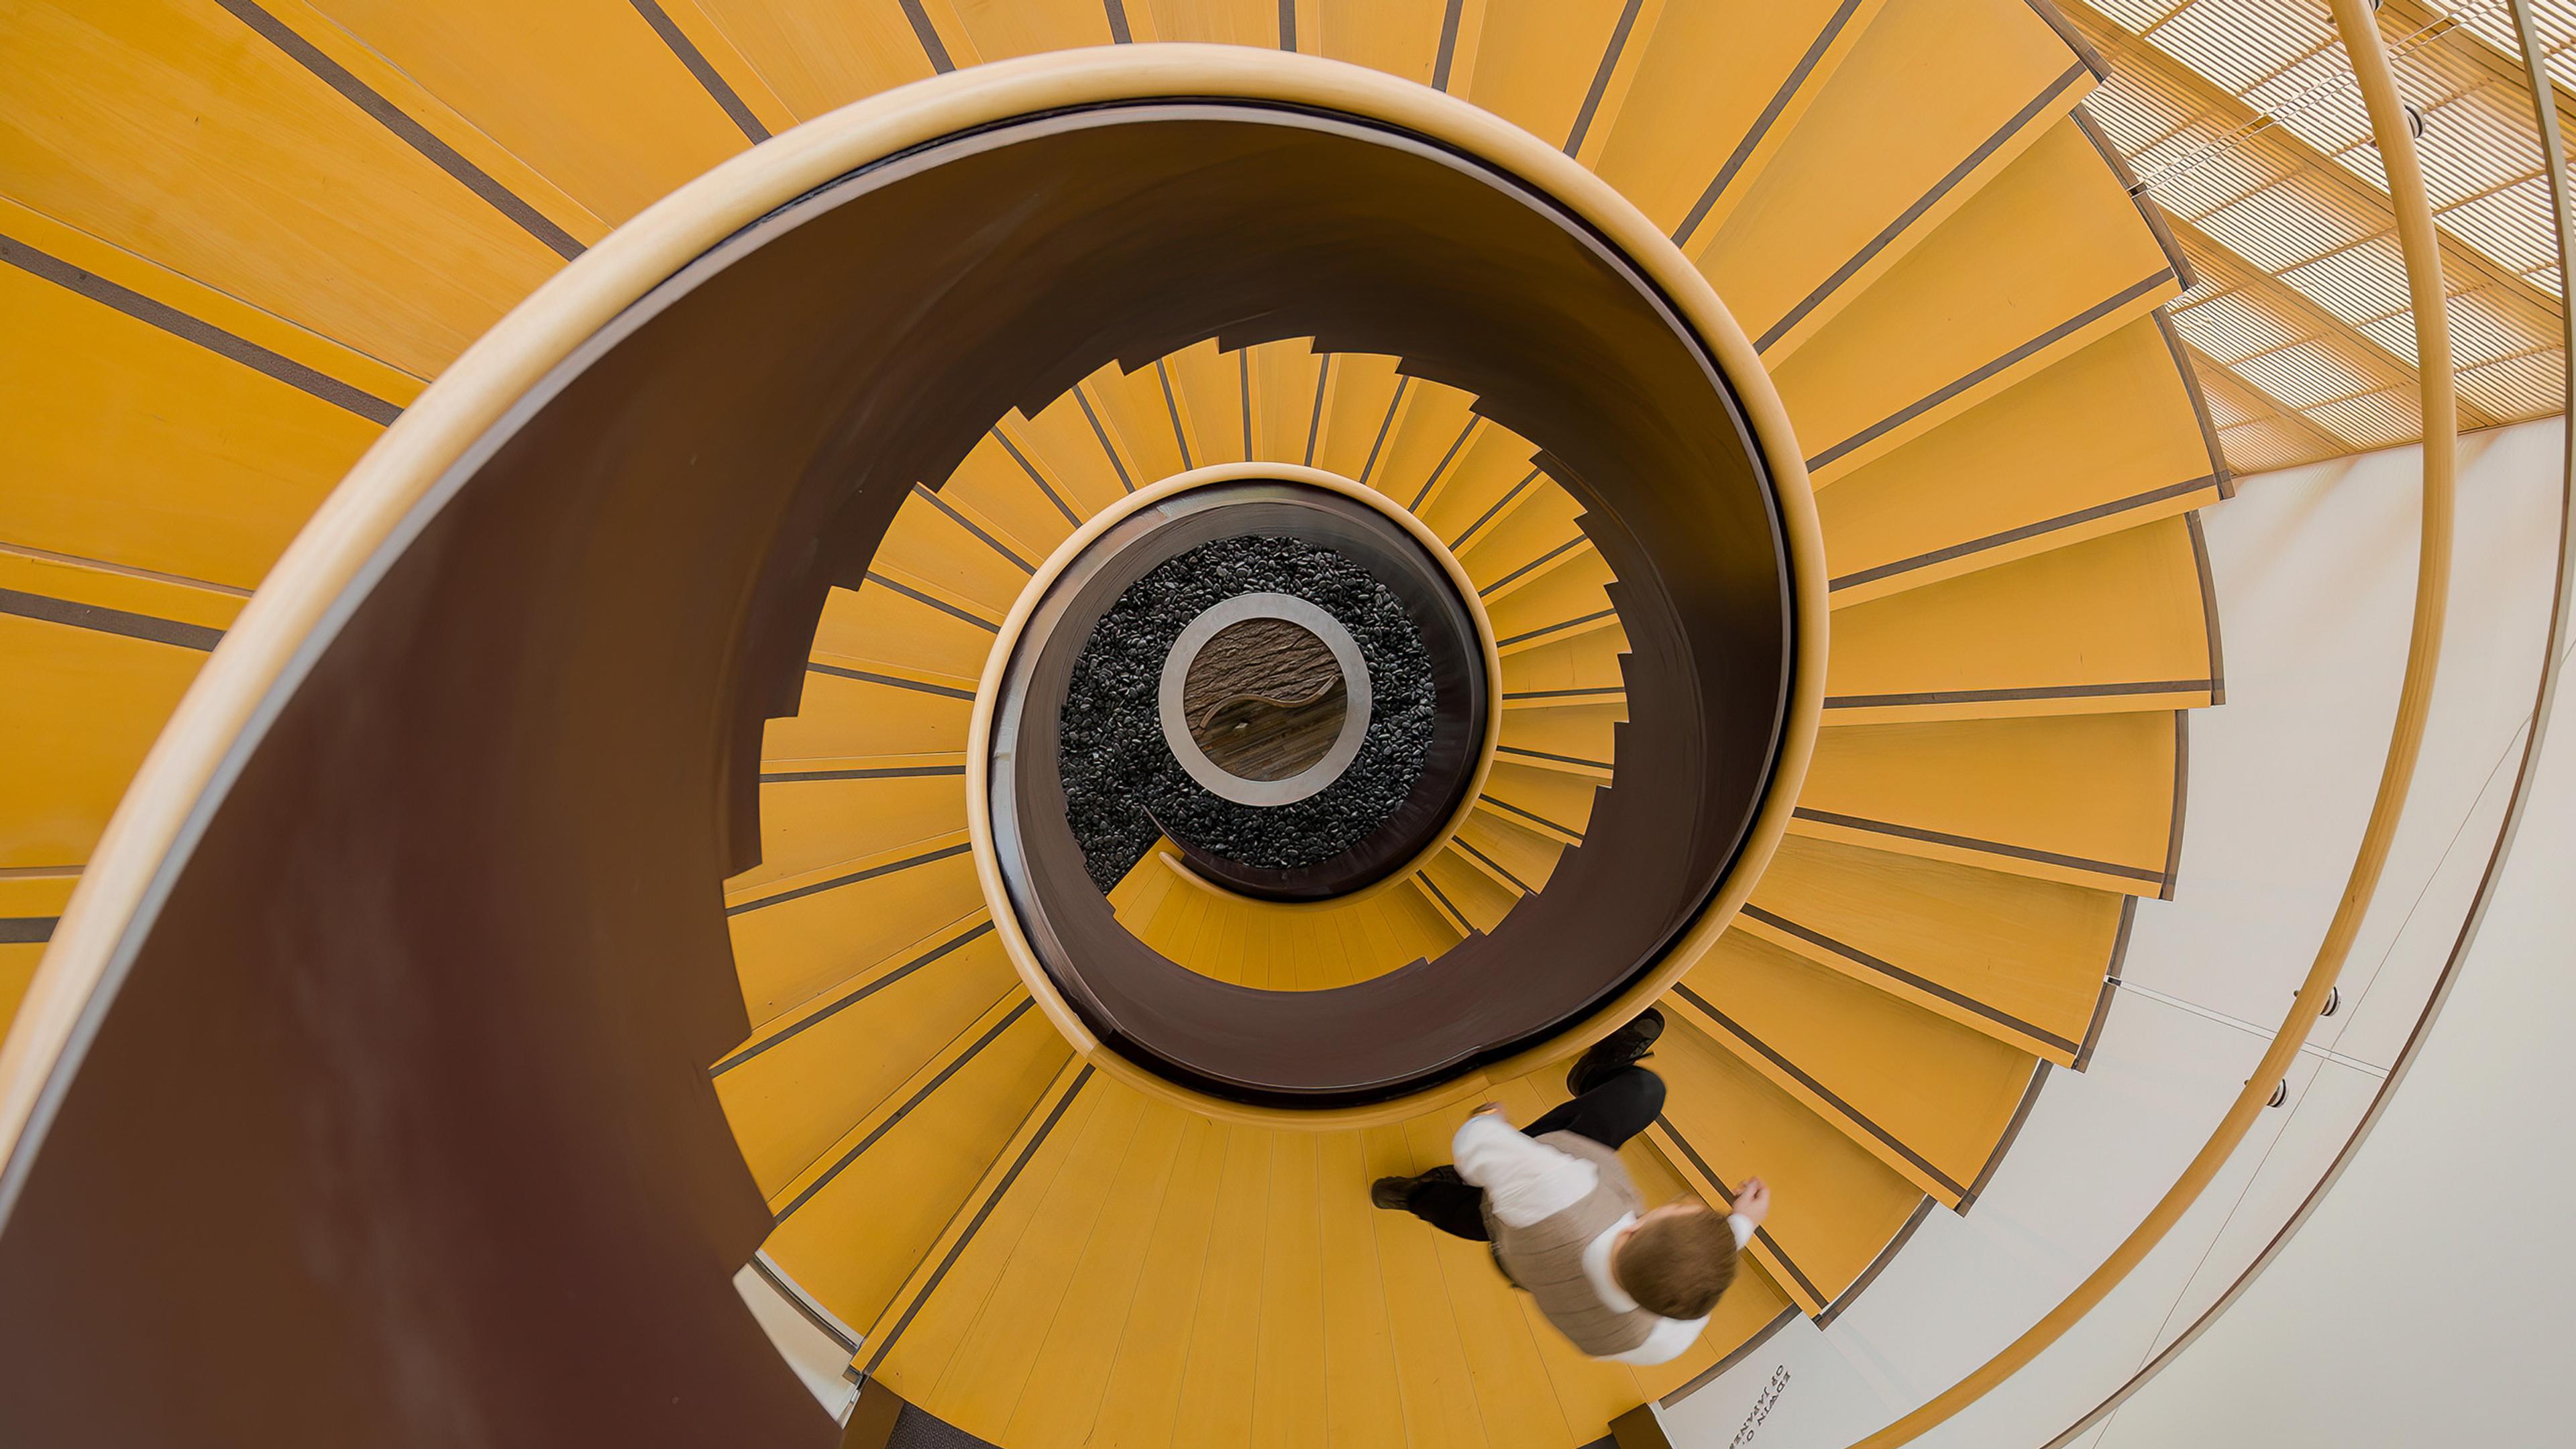 Overhead view of a person walking down a spiral staircase with yellow steps. The staircase creates a swirling visual effect.